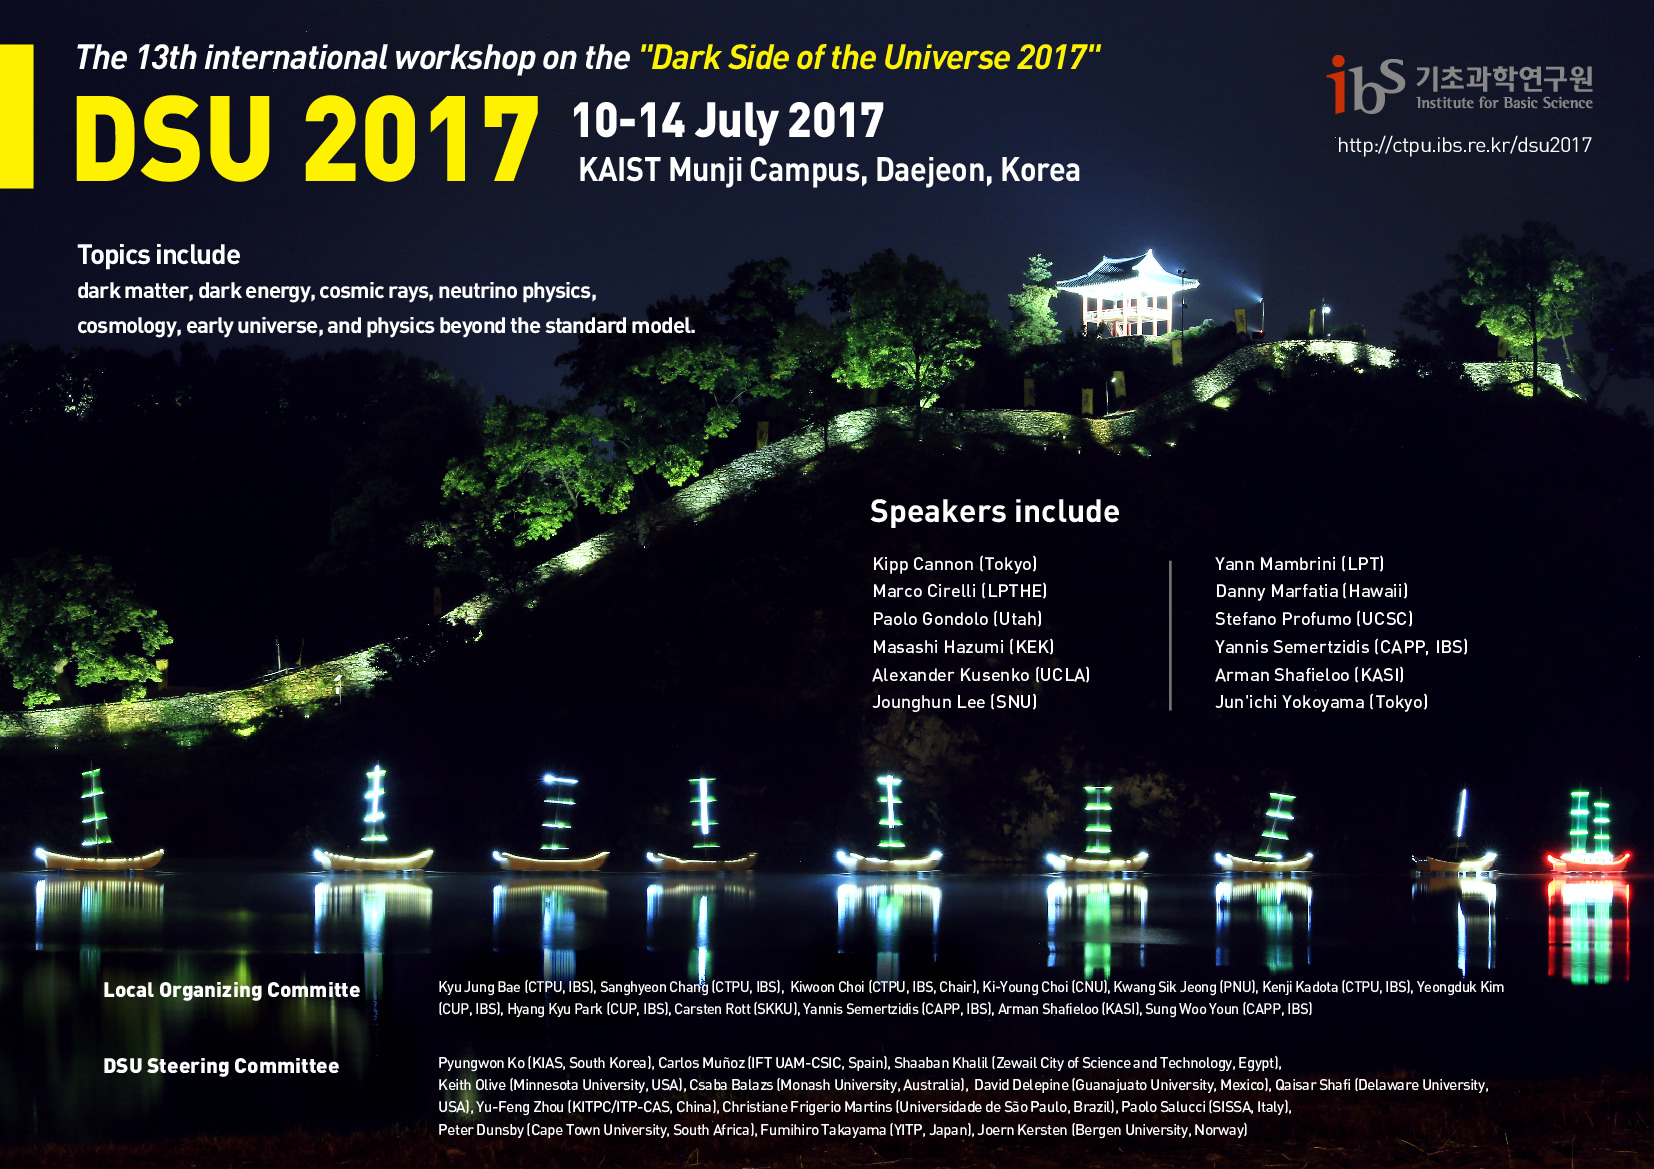 The 13th international workshop on the Dark Side of the Universe 2017